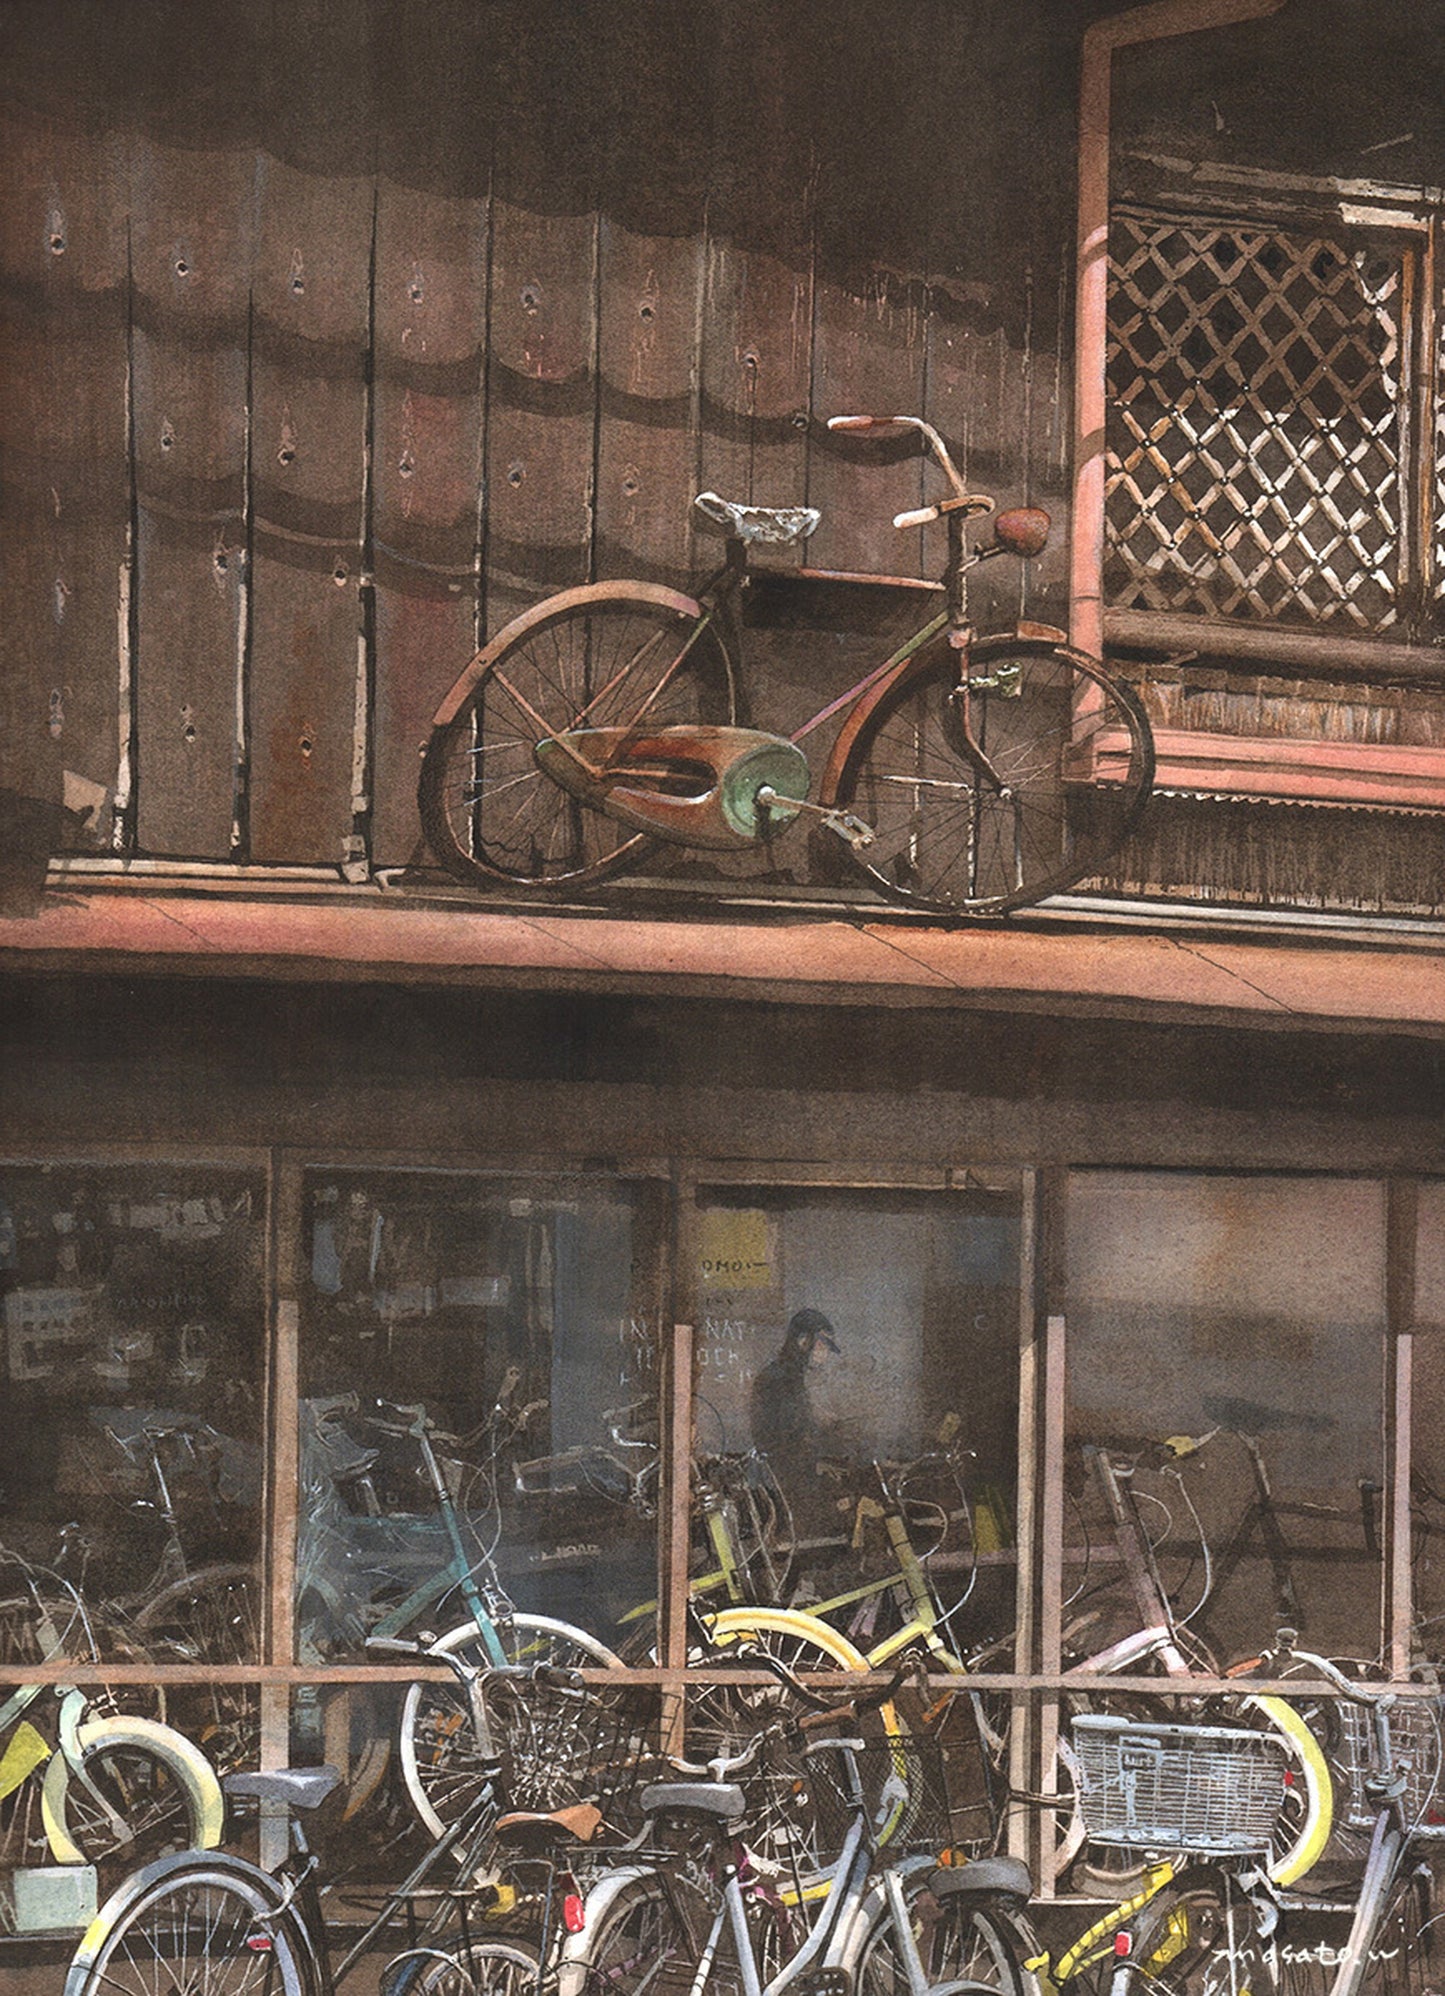 Old bicycle shop